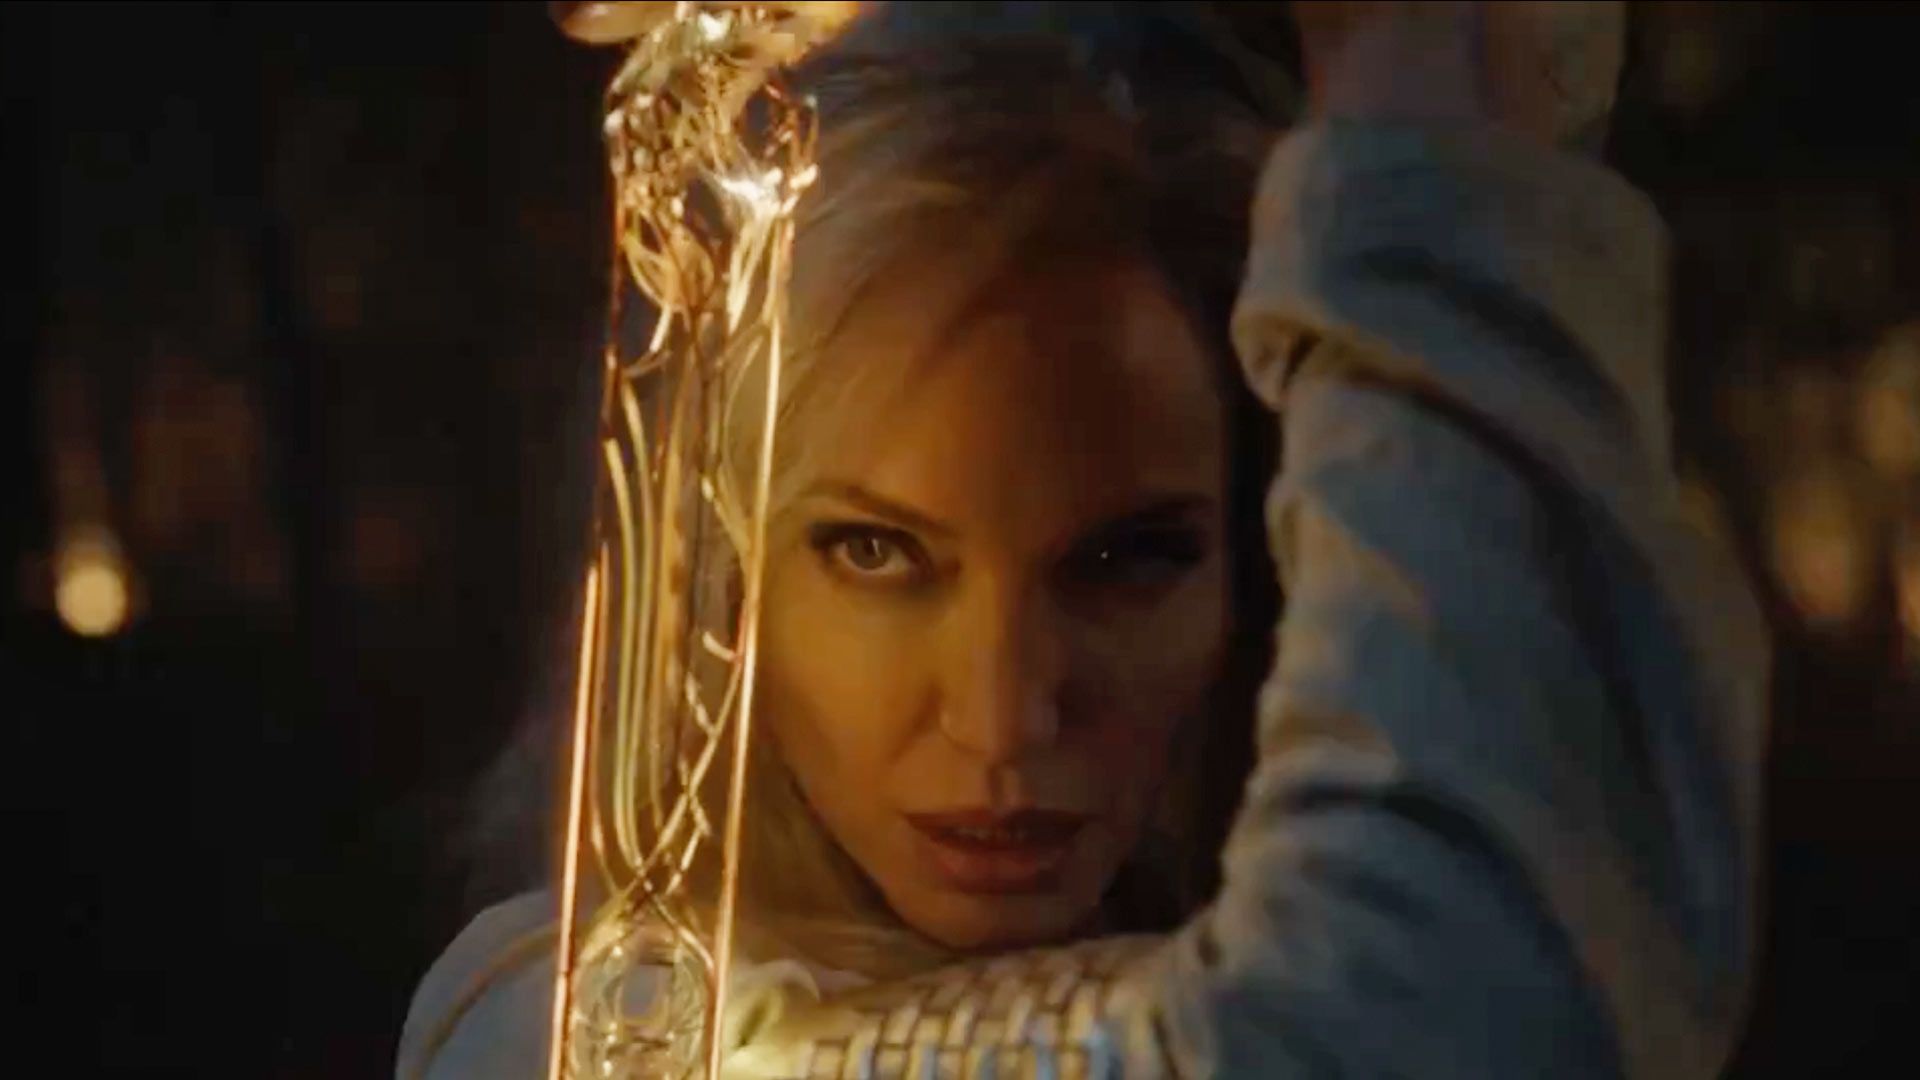 Angelina Jolie Wows as a Superhero in First Look at Marvel's The Eternals